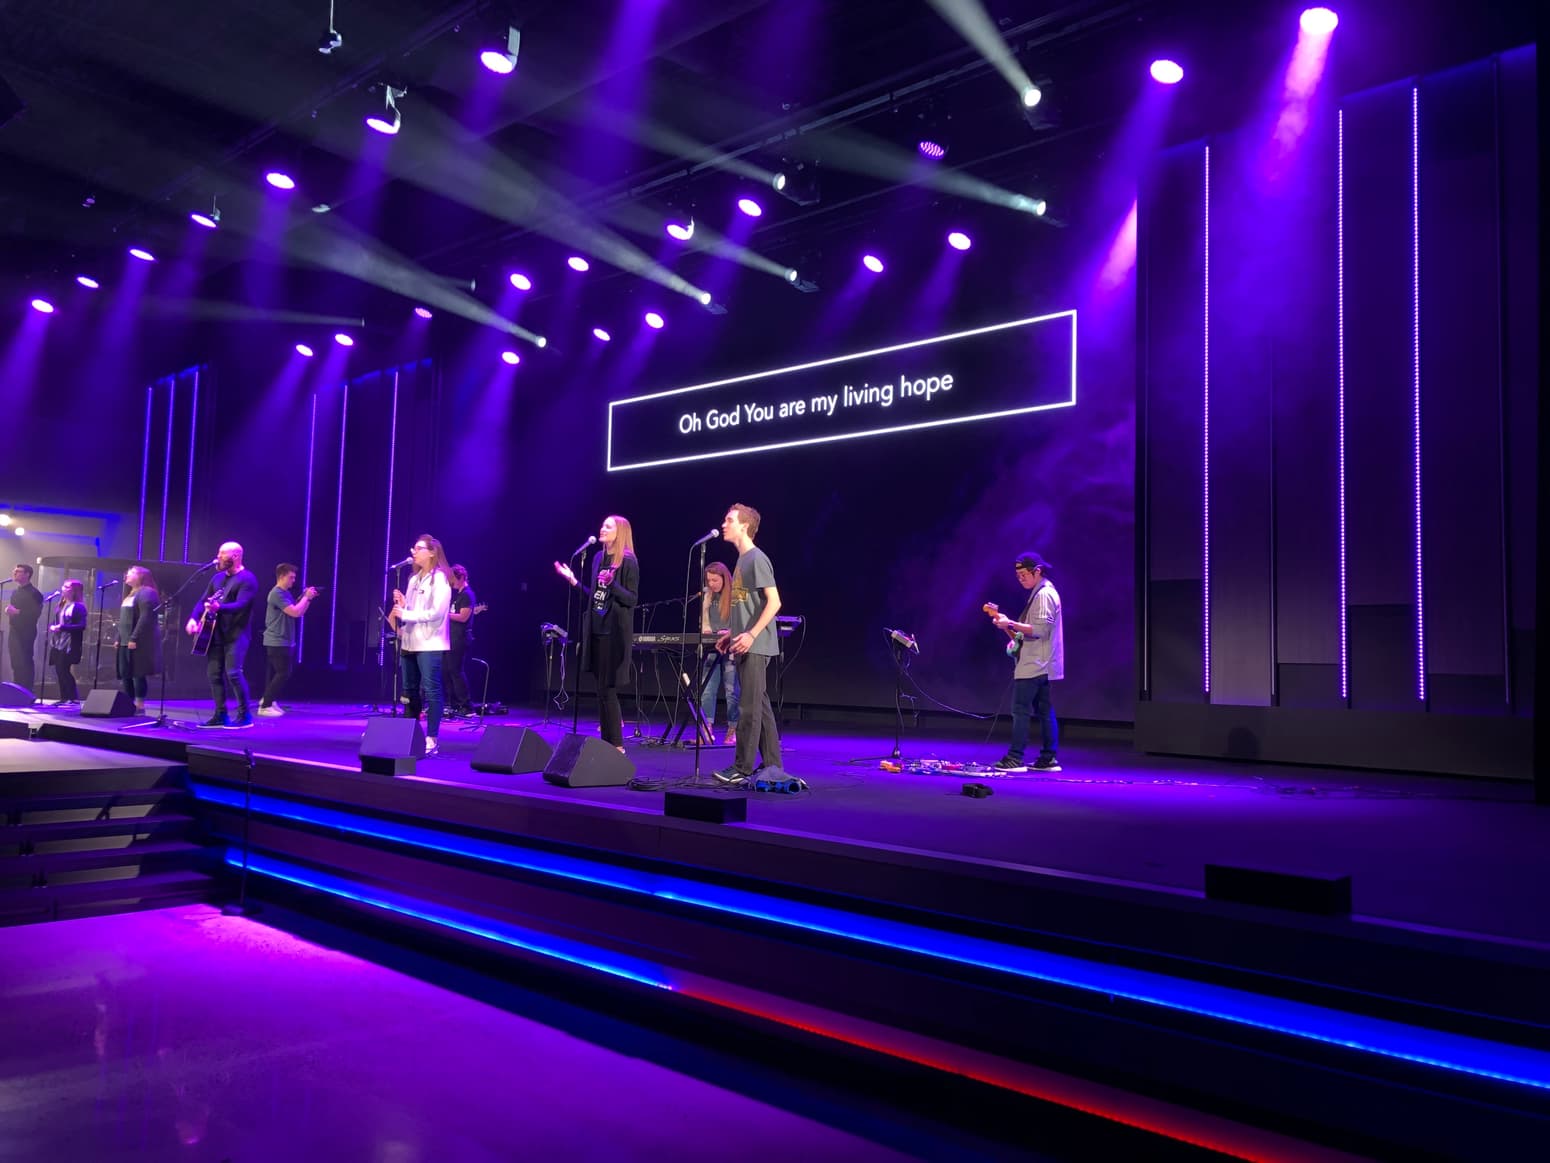 This church stage lighting system delivers the Word.